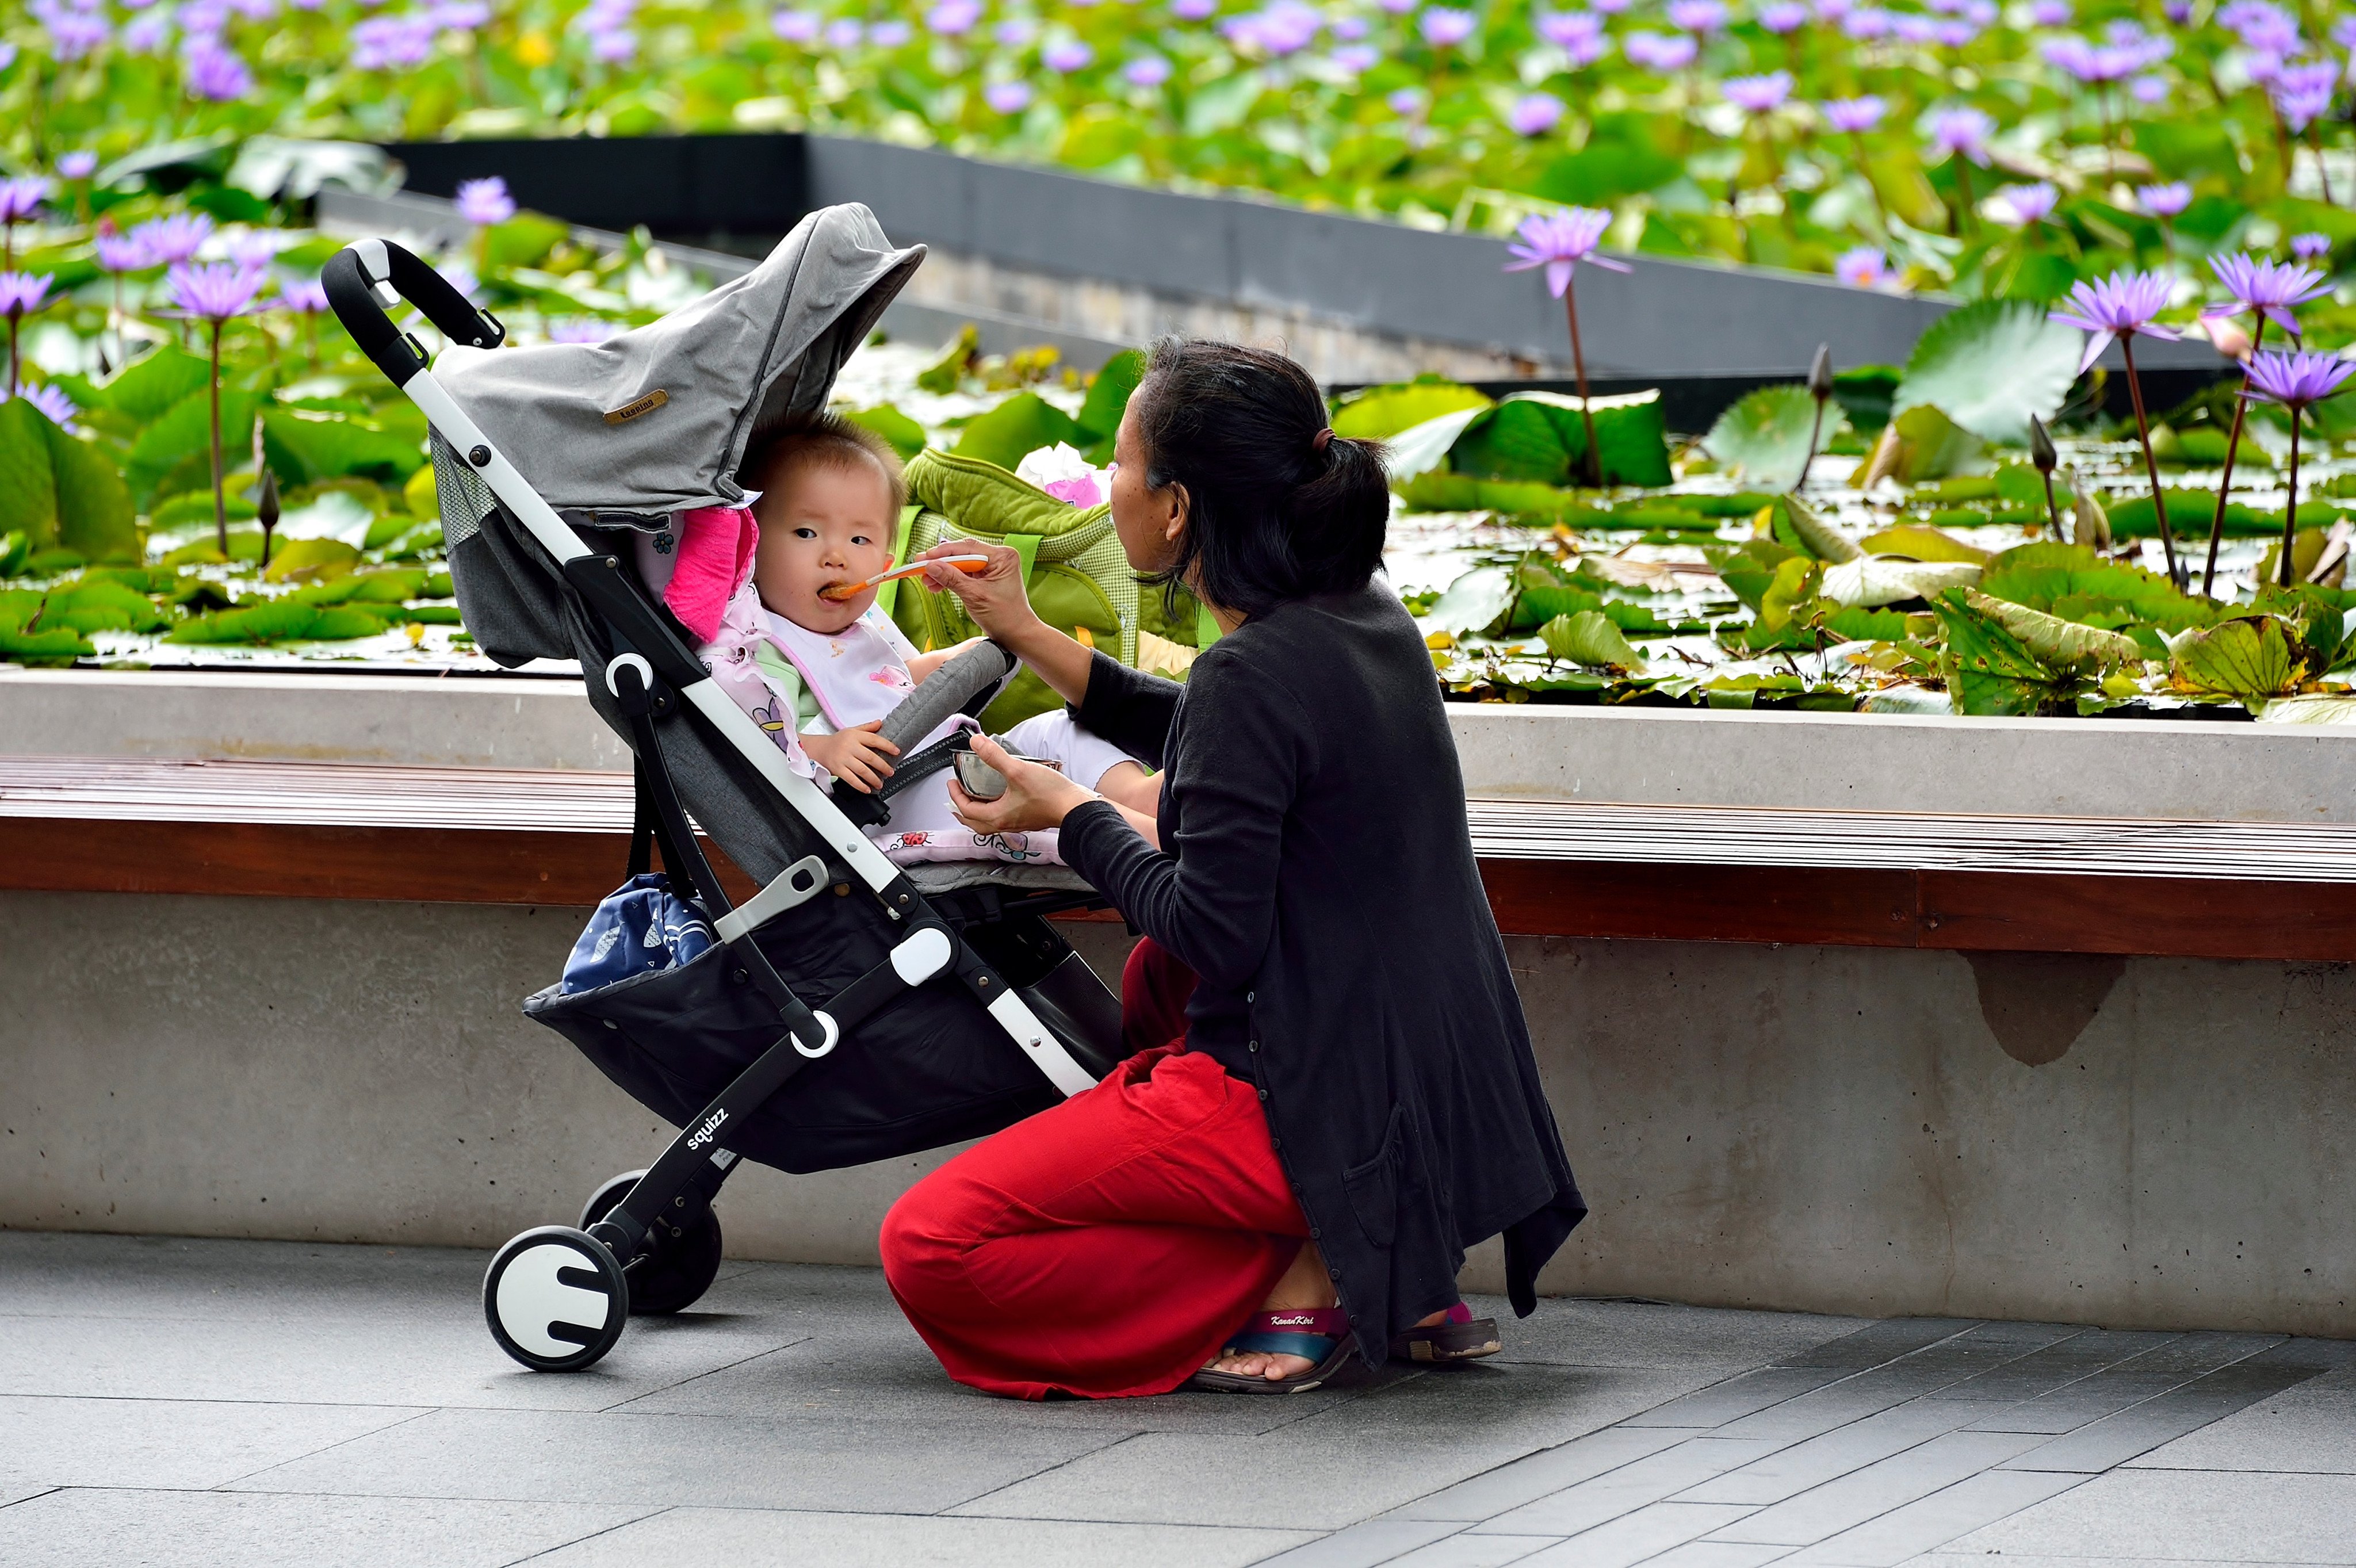 The Asia-Pacific is fast running out of babies as birth rates plummet, causing demand for assisted-reproductive technology and fertility clinics to skyrocket. Photo: Shutterstock